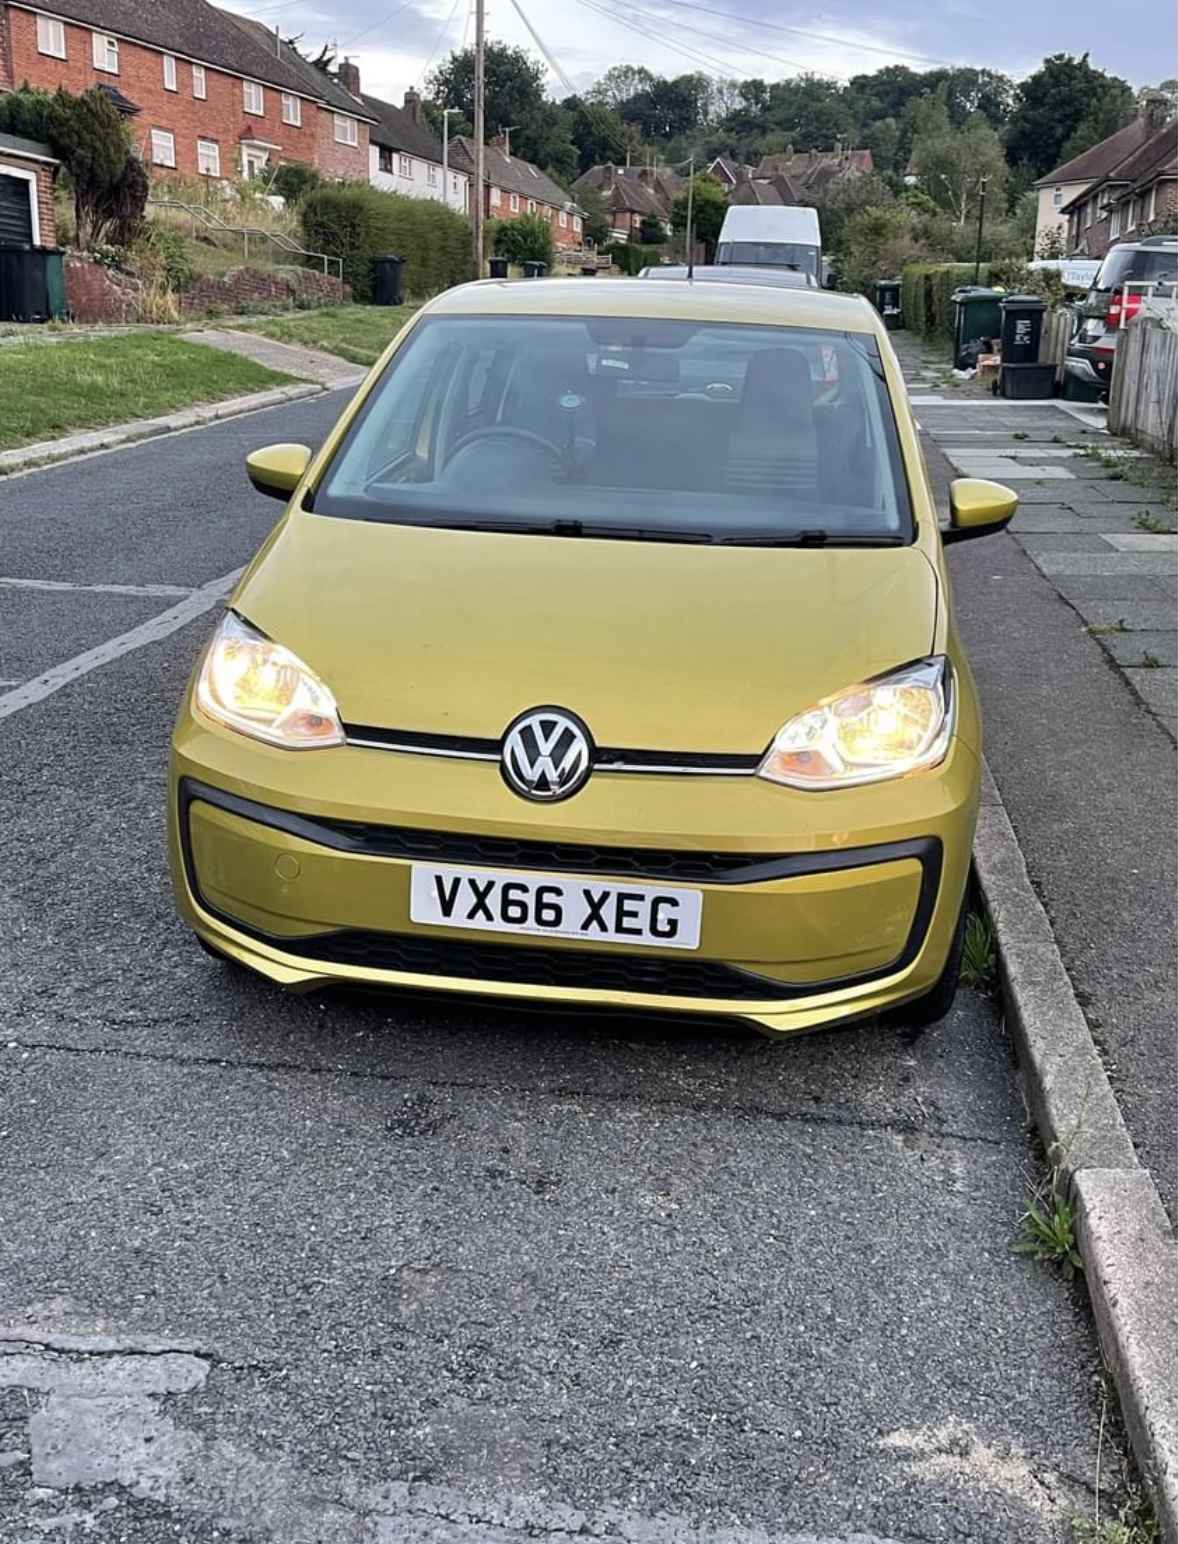 Photograph of VX66 XEG - a Gold Volkswagen Up parked in Hollingdean by a non-resident and stored here whilst a dodgy car dealer attempts to sell it. The second of four photographs supplied by the residents of Hollingdean.